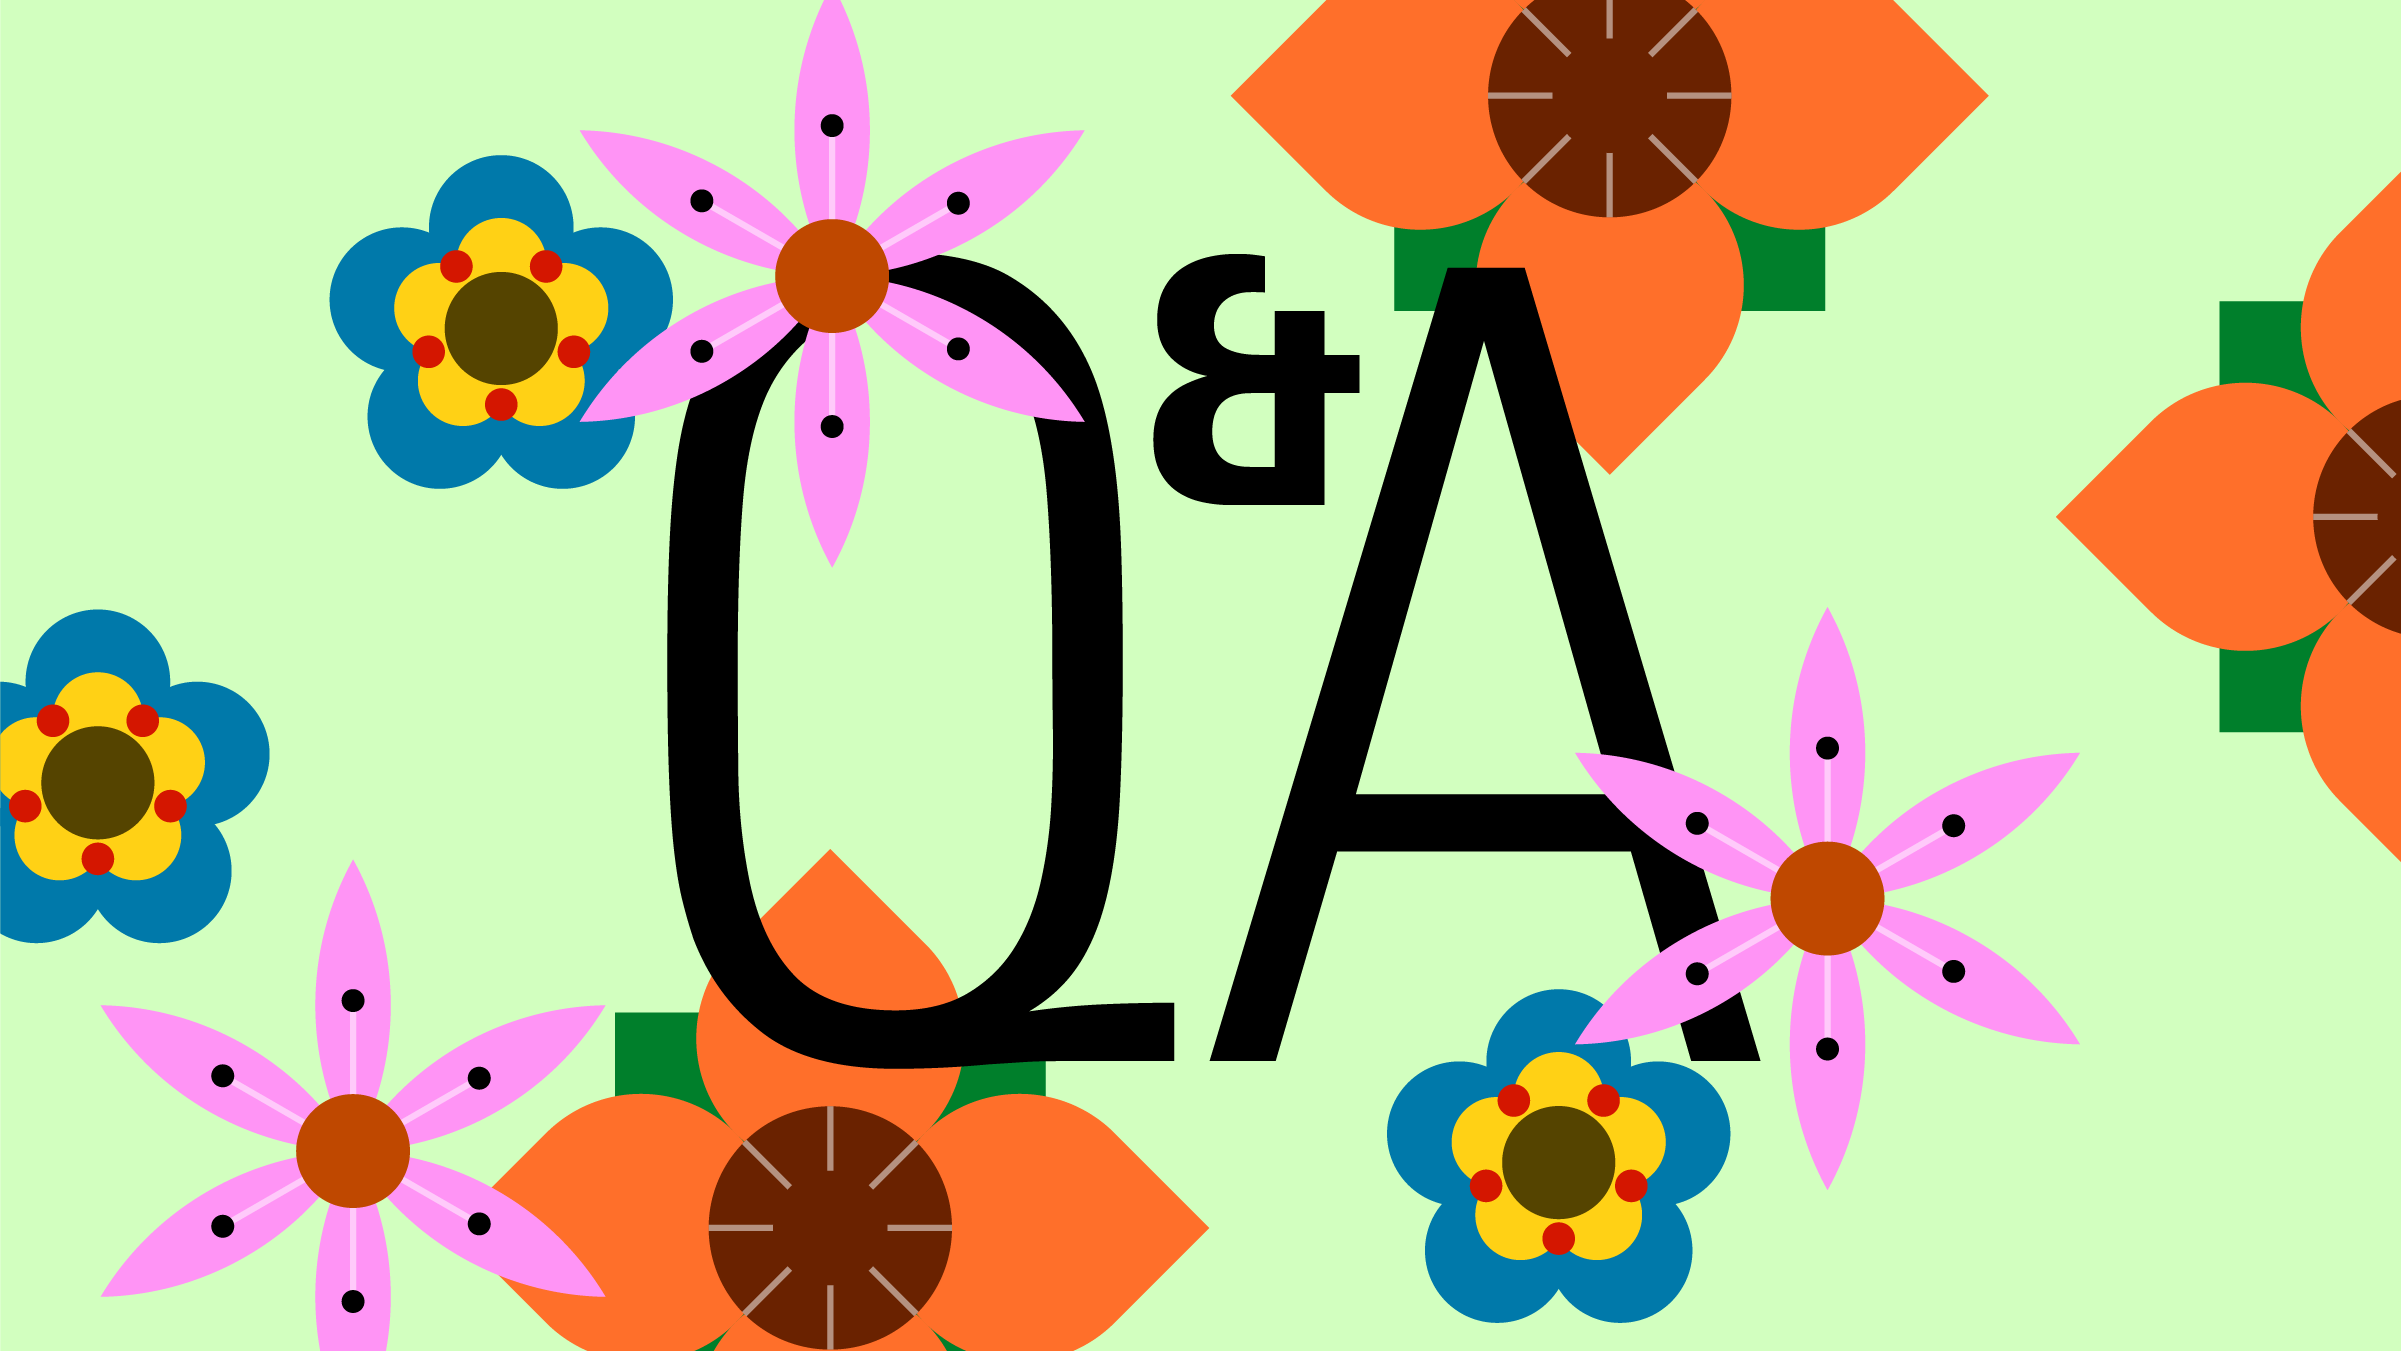 Illustration of various colorful flowers with the title "Q&A" at the center.